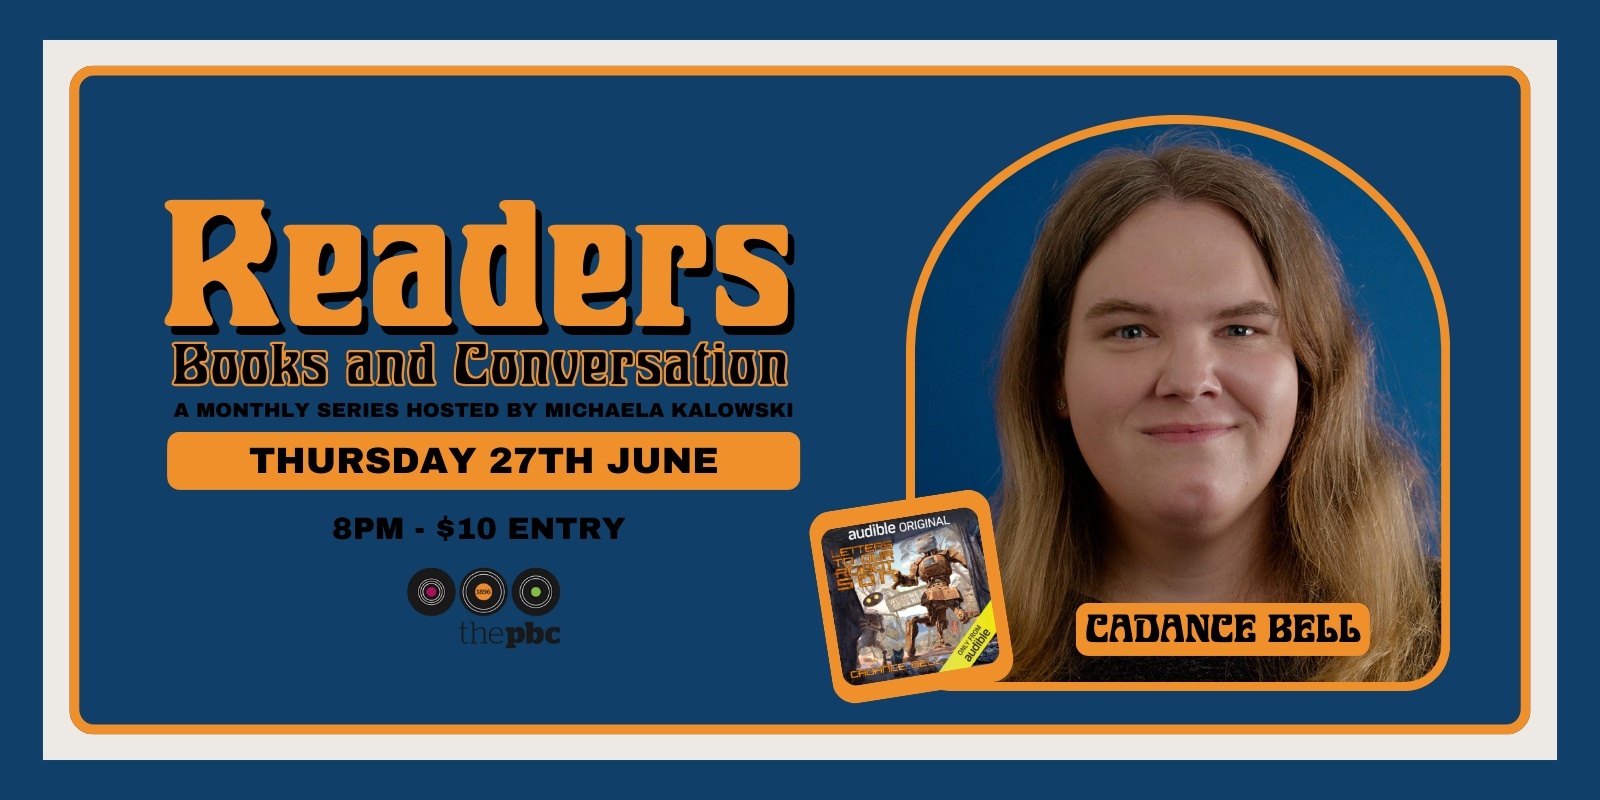 Banner image for Readers - Books and Conversation with Cadance Bell 